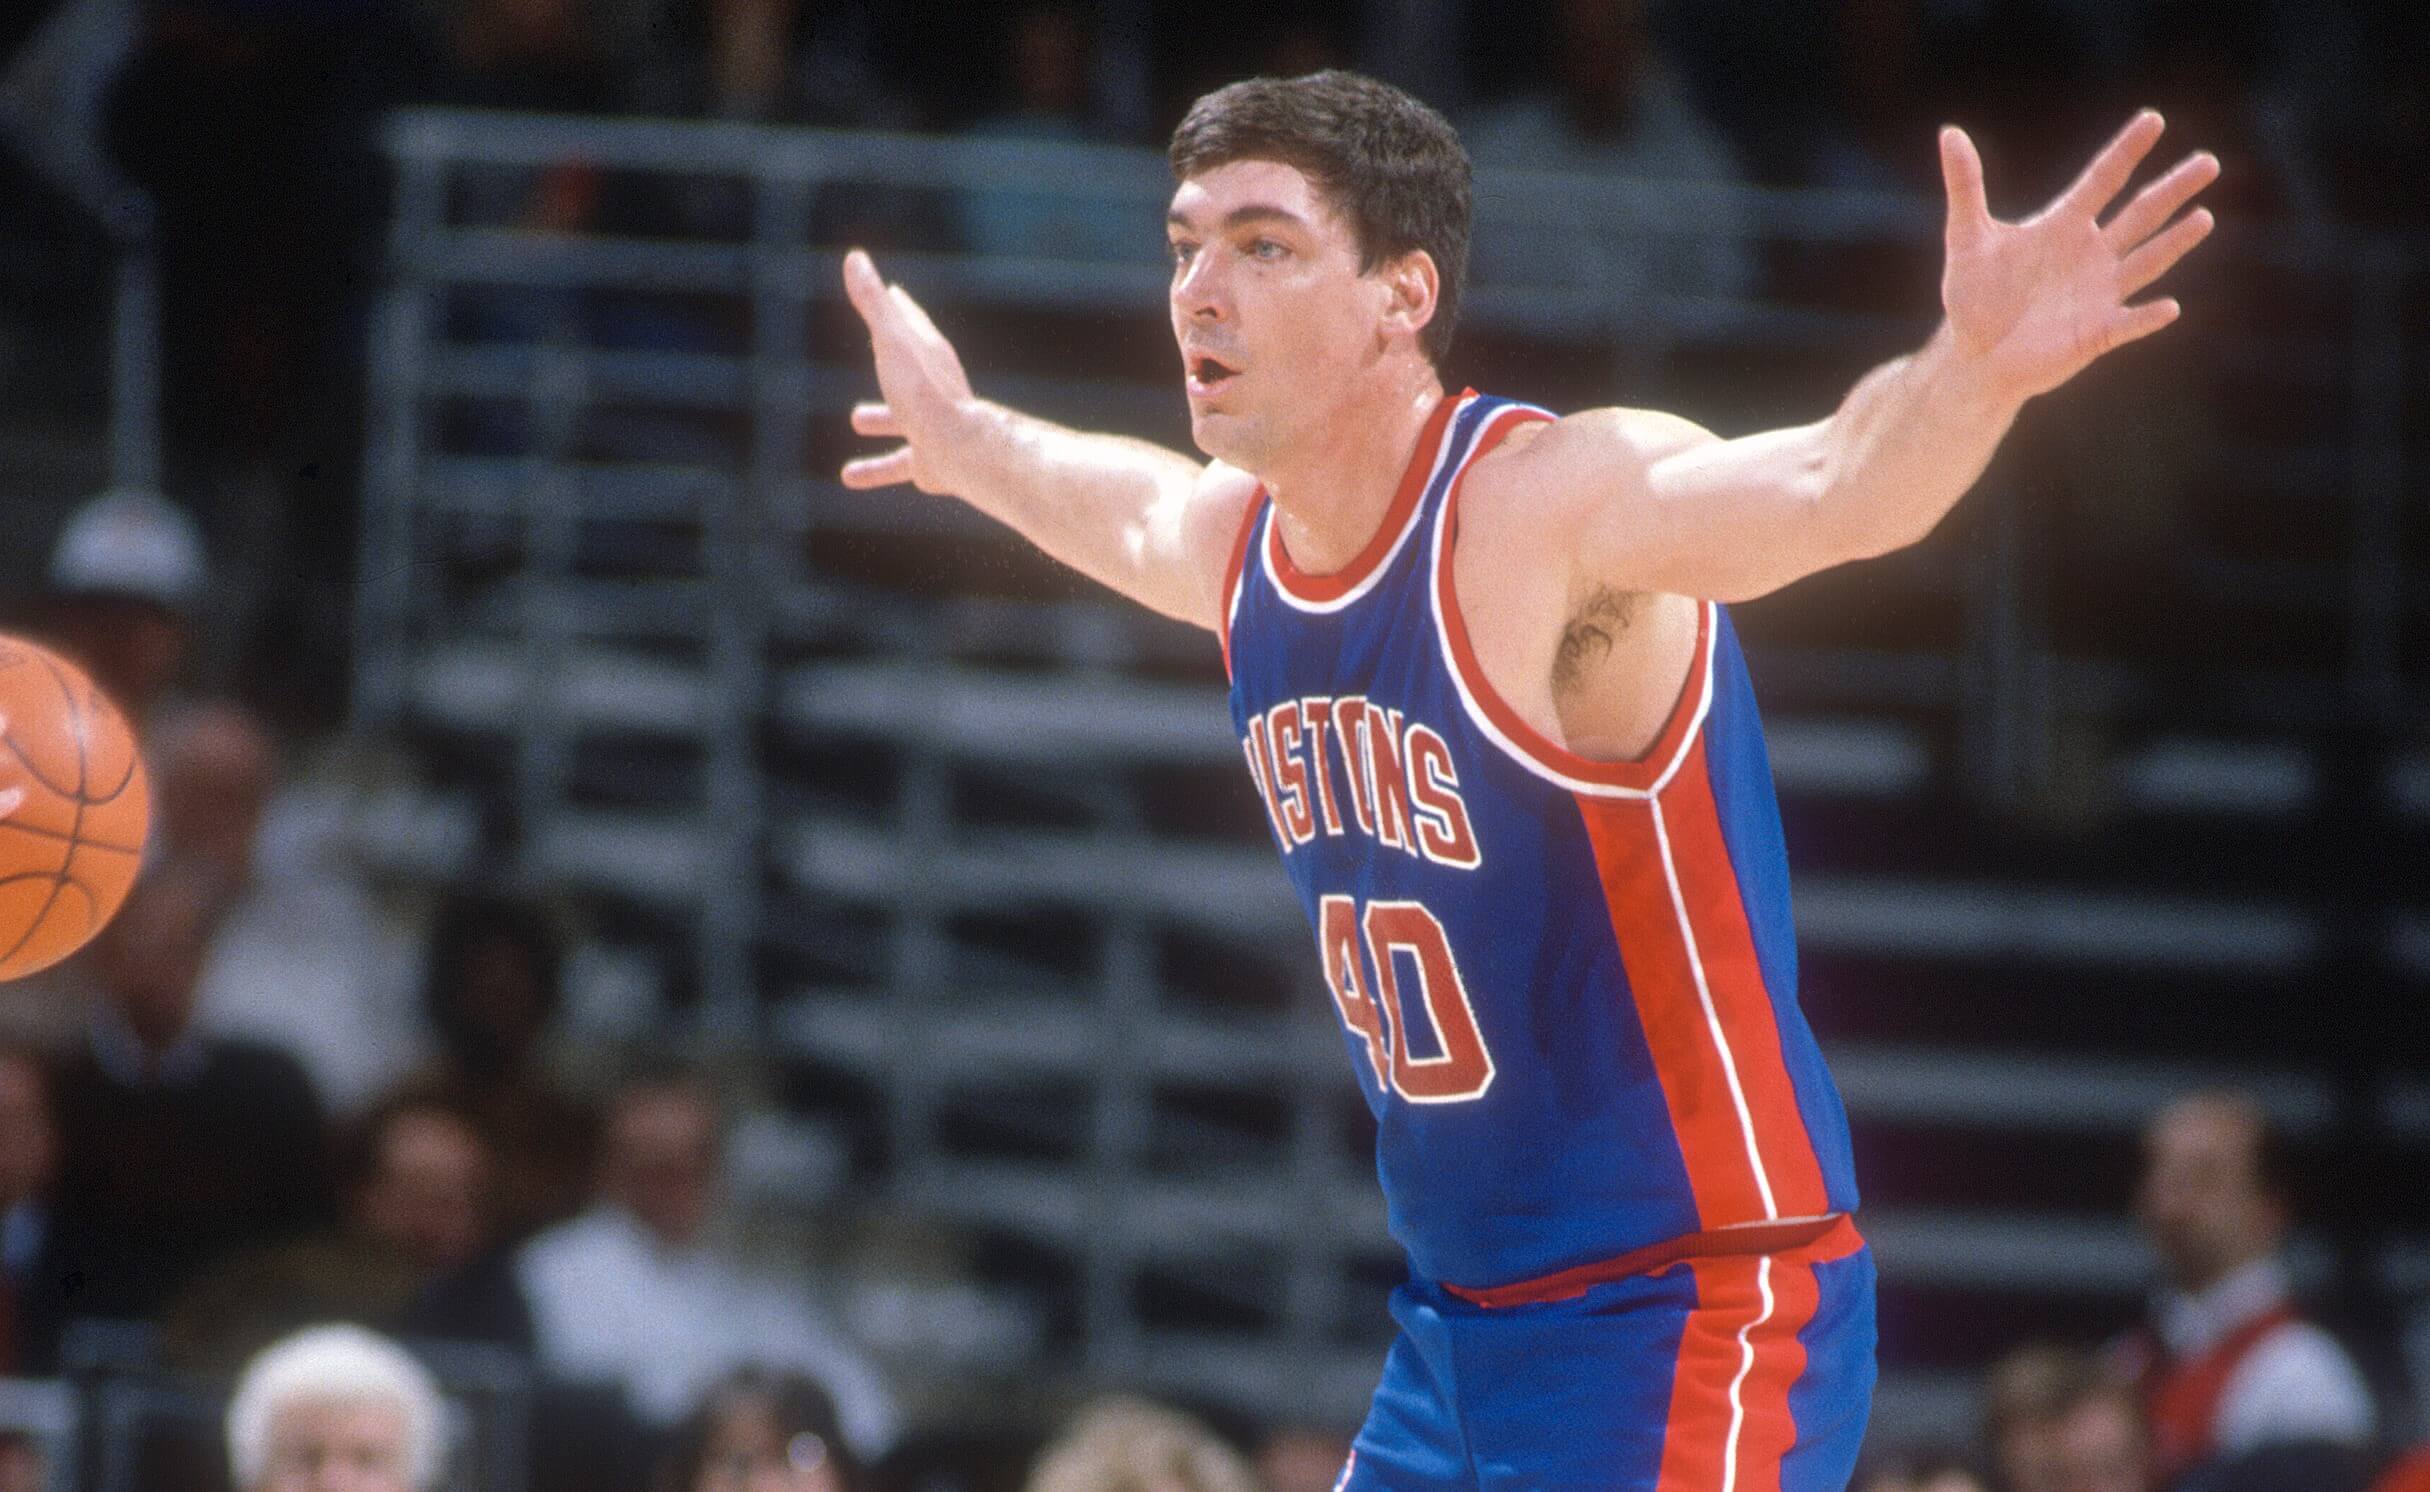 Bill Laimbeer of the Detroit Pistons in action against the Milwaukee Bucks.